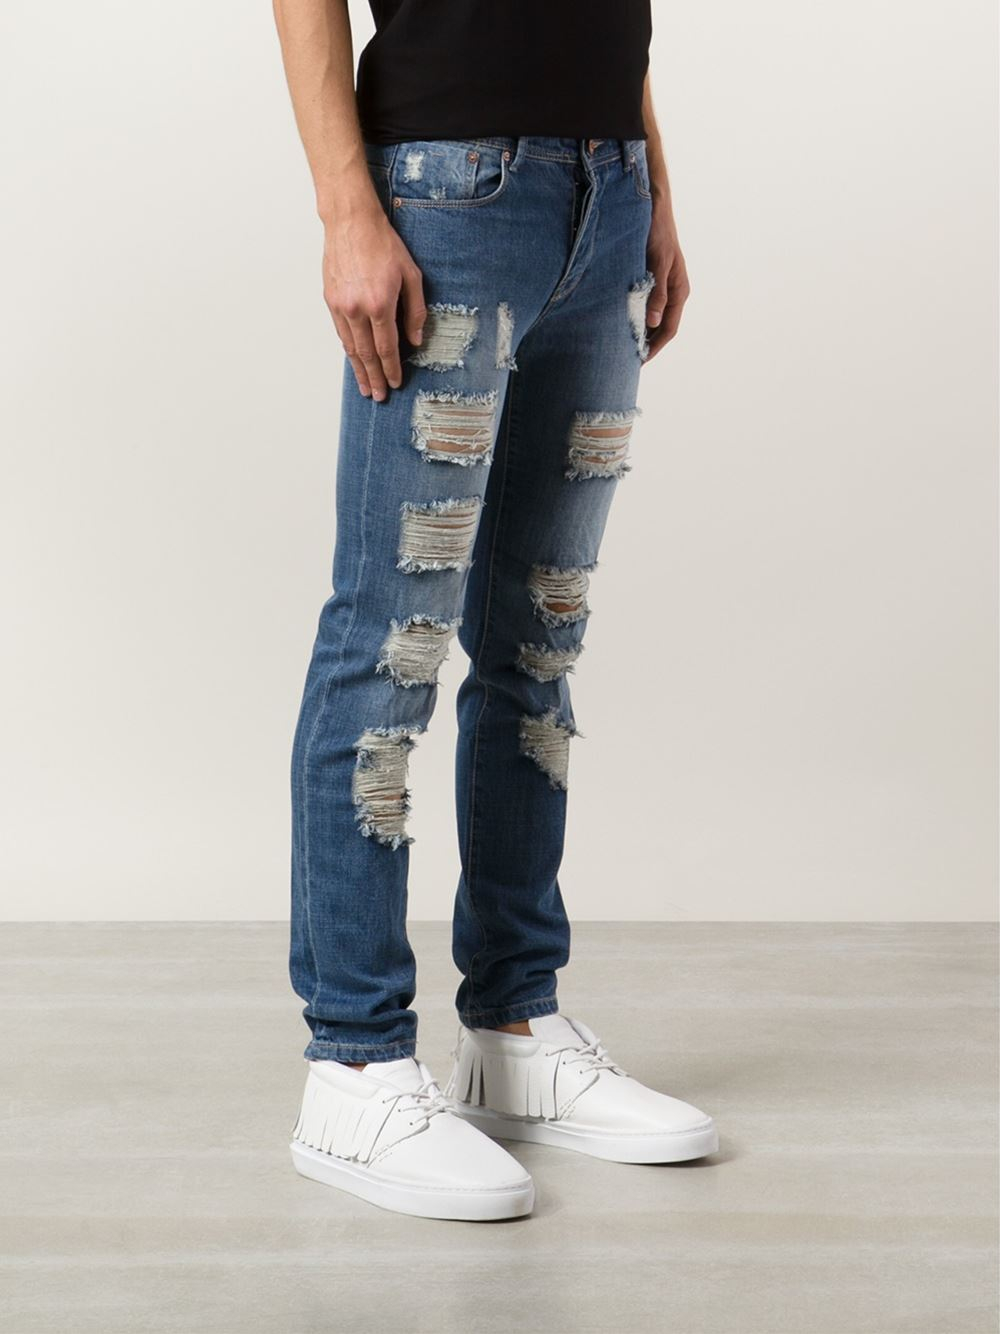 Lyst - Stampd Ripped Slim Fit Jeans in Blue for Men